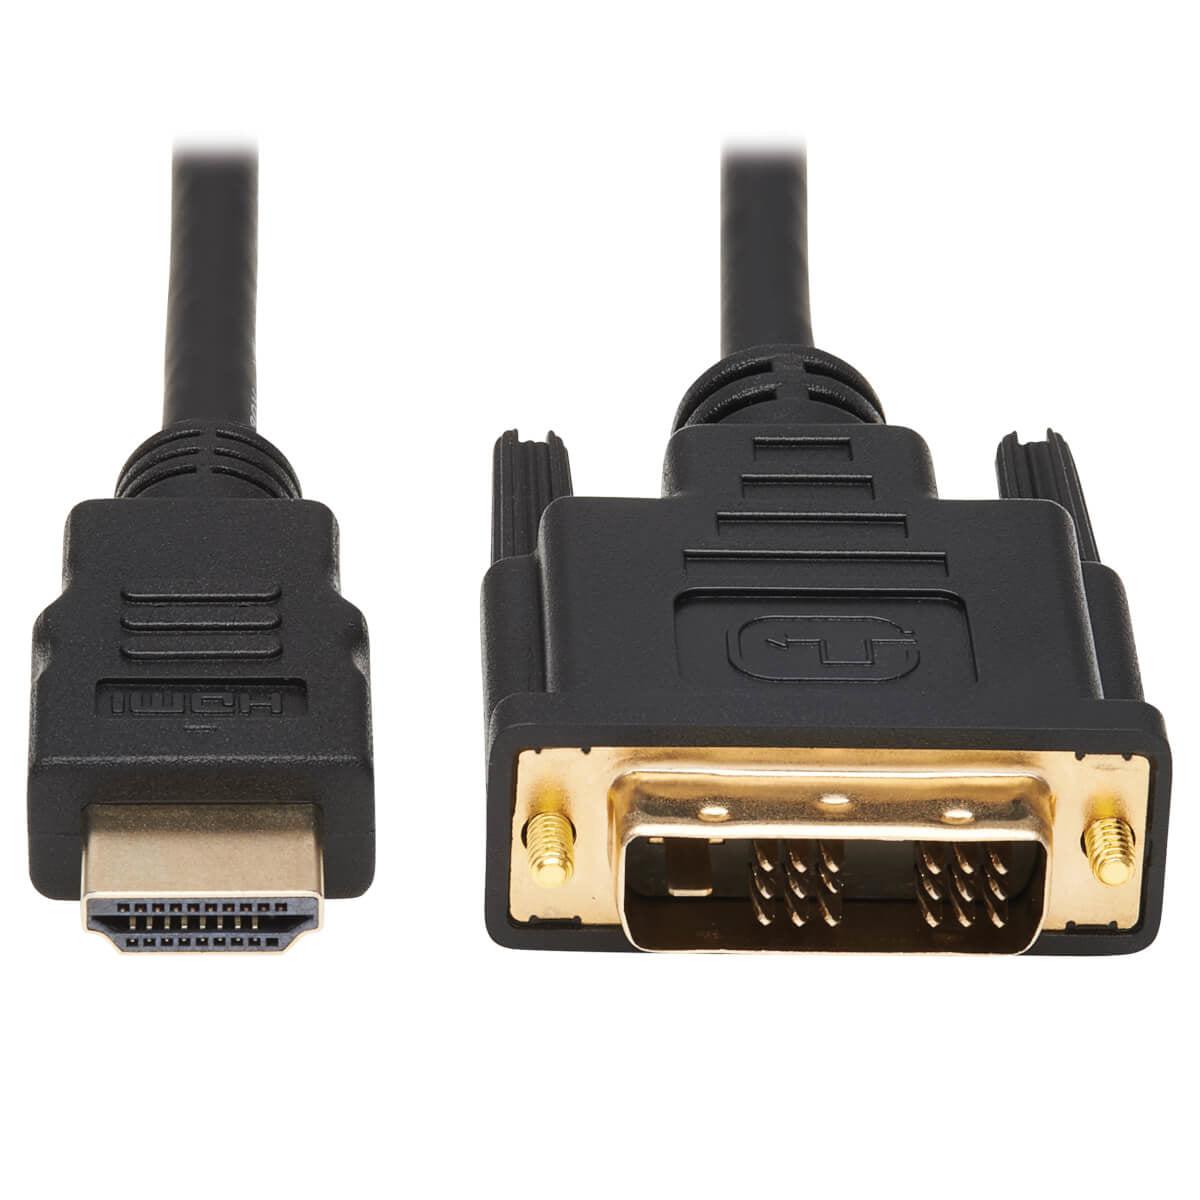 Tripp Lite P566-012 Hdmi To Dvi Adapter Cable (M/M), 12 Ft. (3.7 M)